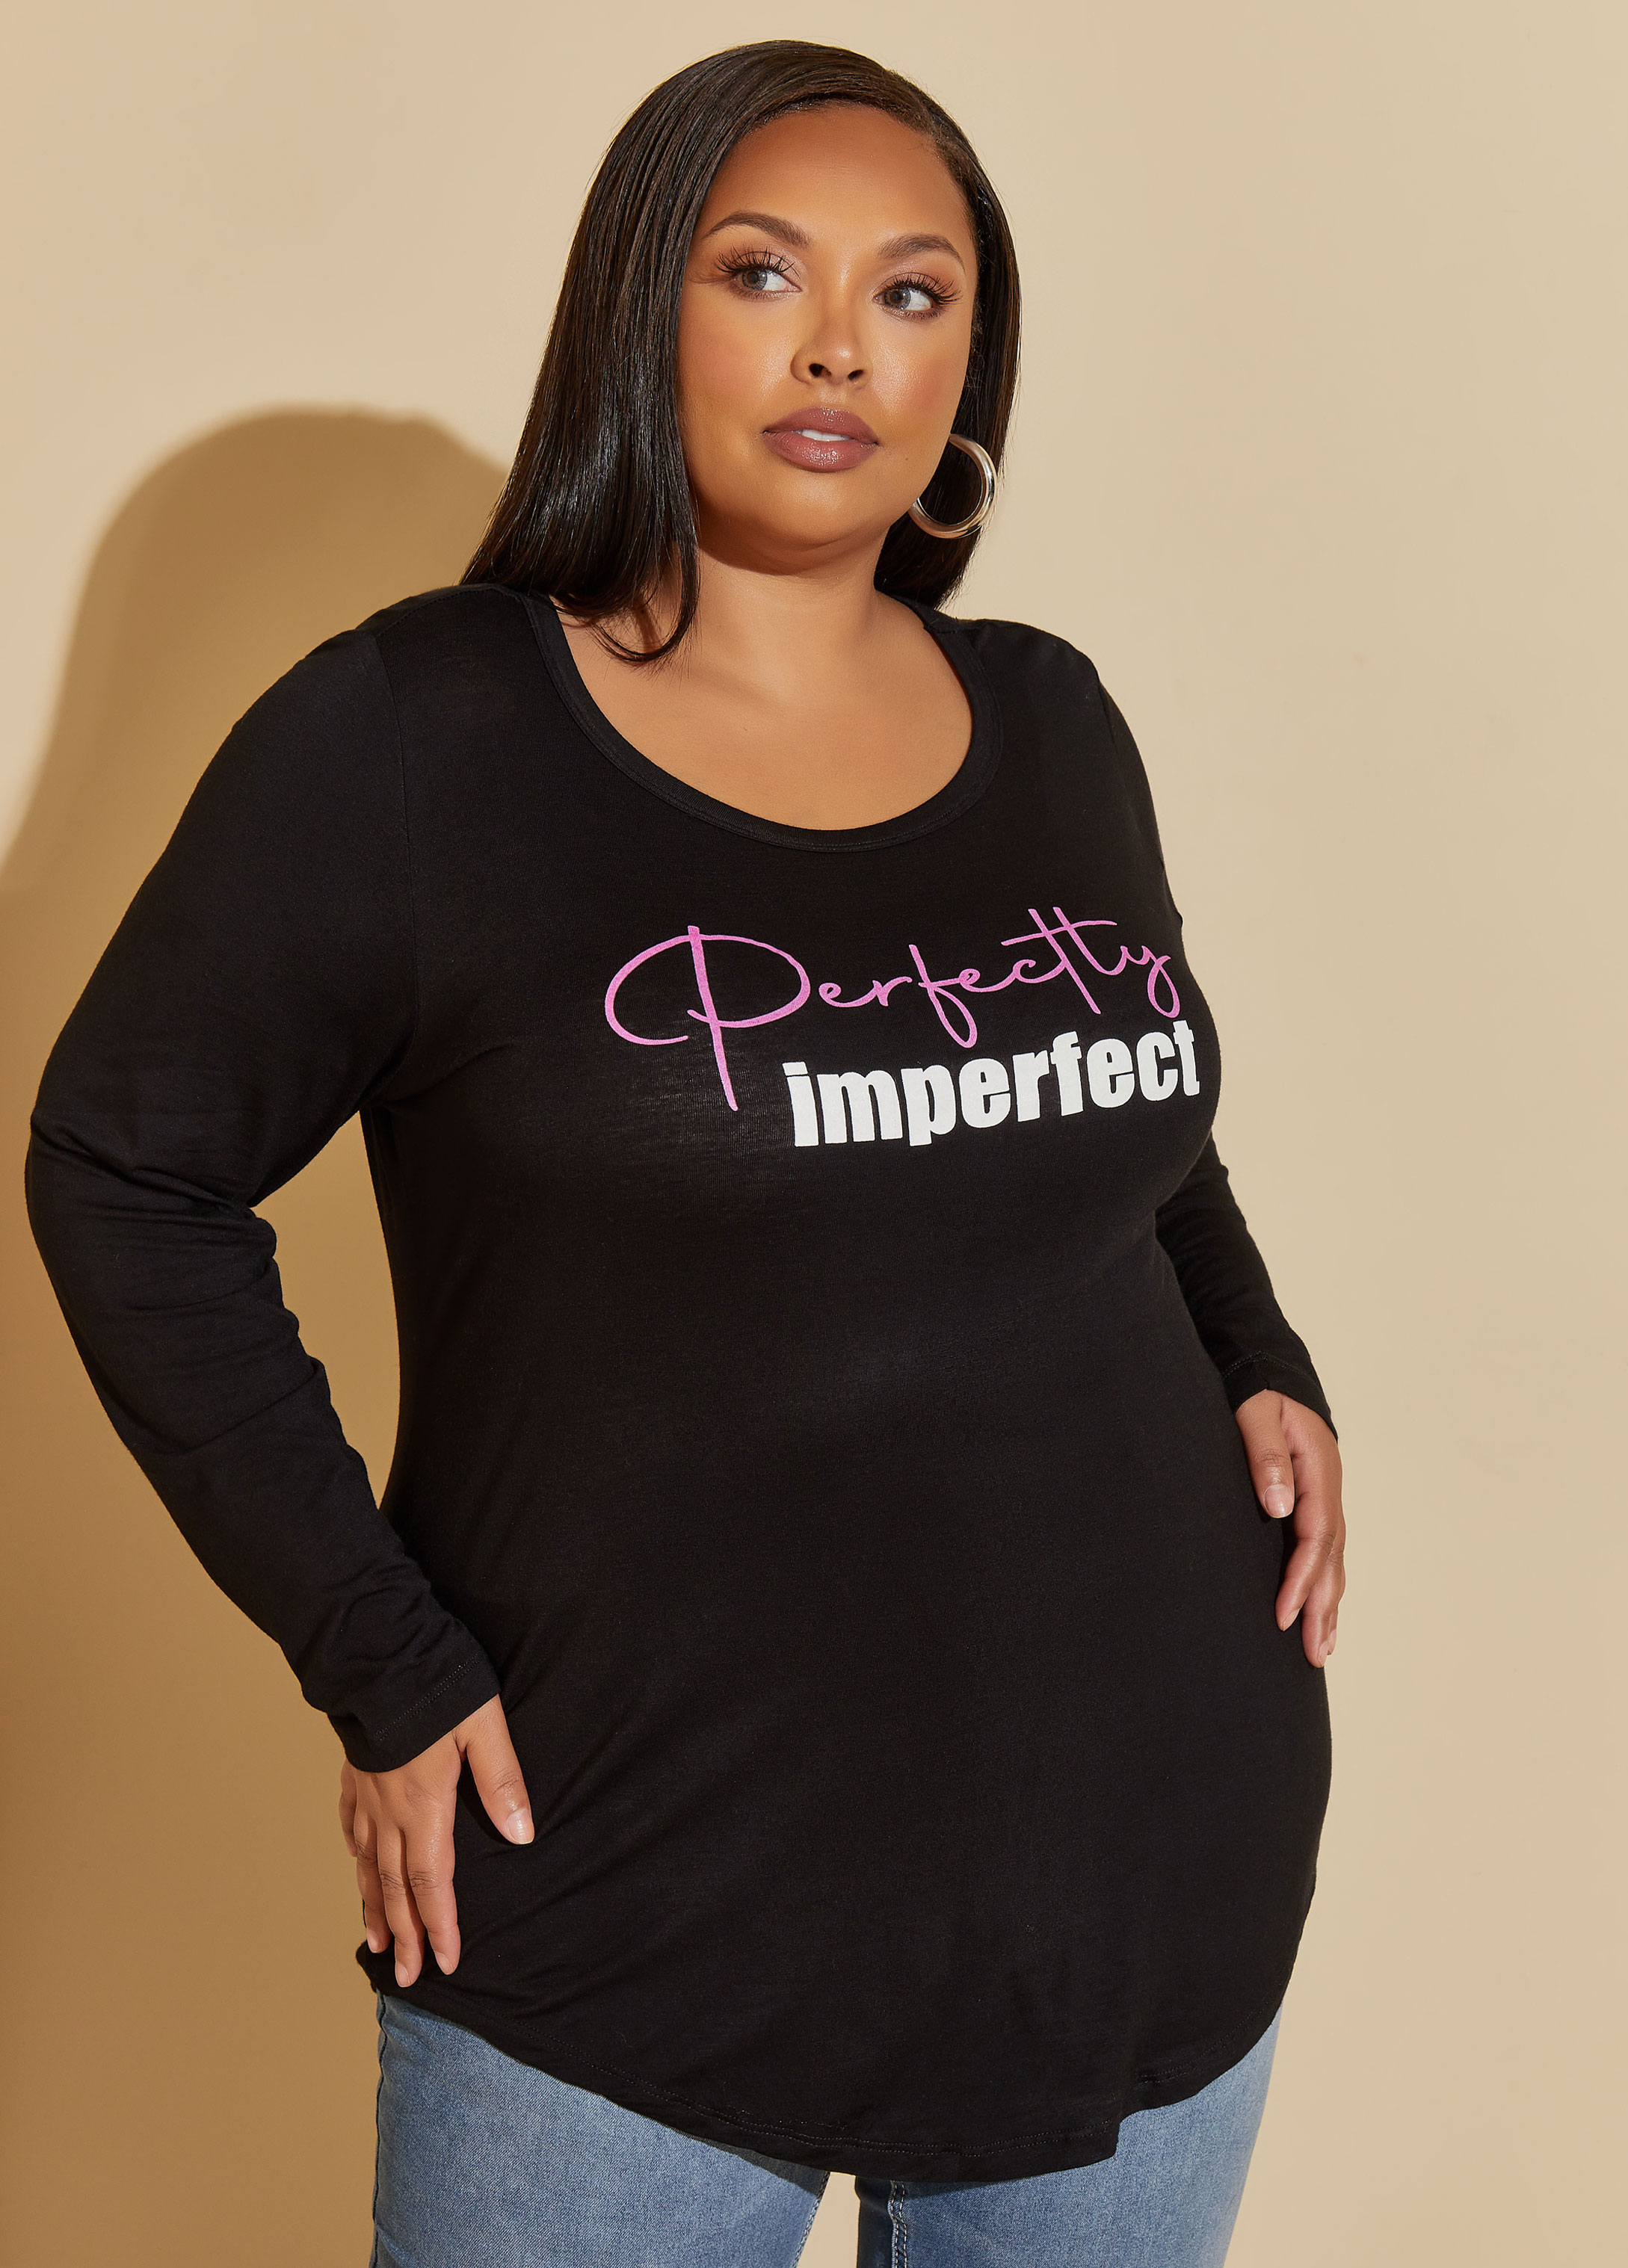 Plus Size Perfectly Imperfect Graphic Tee, BLACK, 14/16 - Ashley Stewart